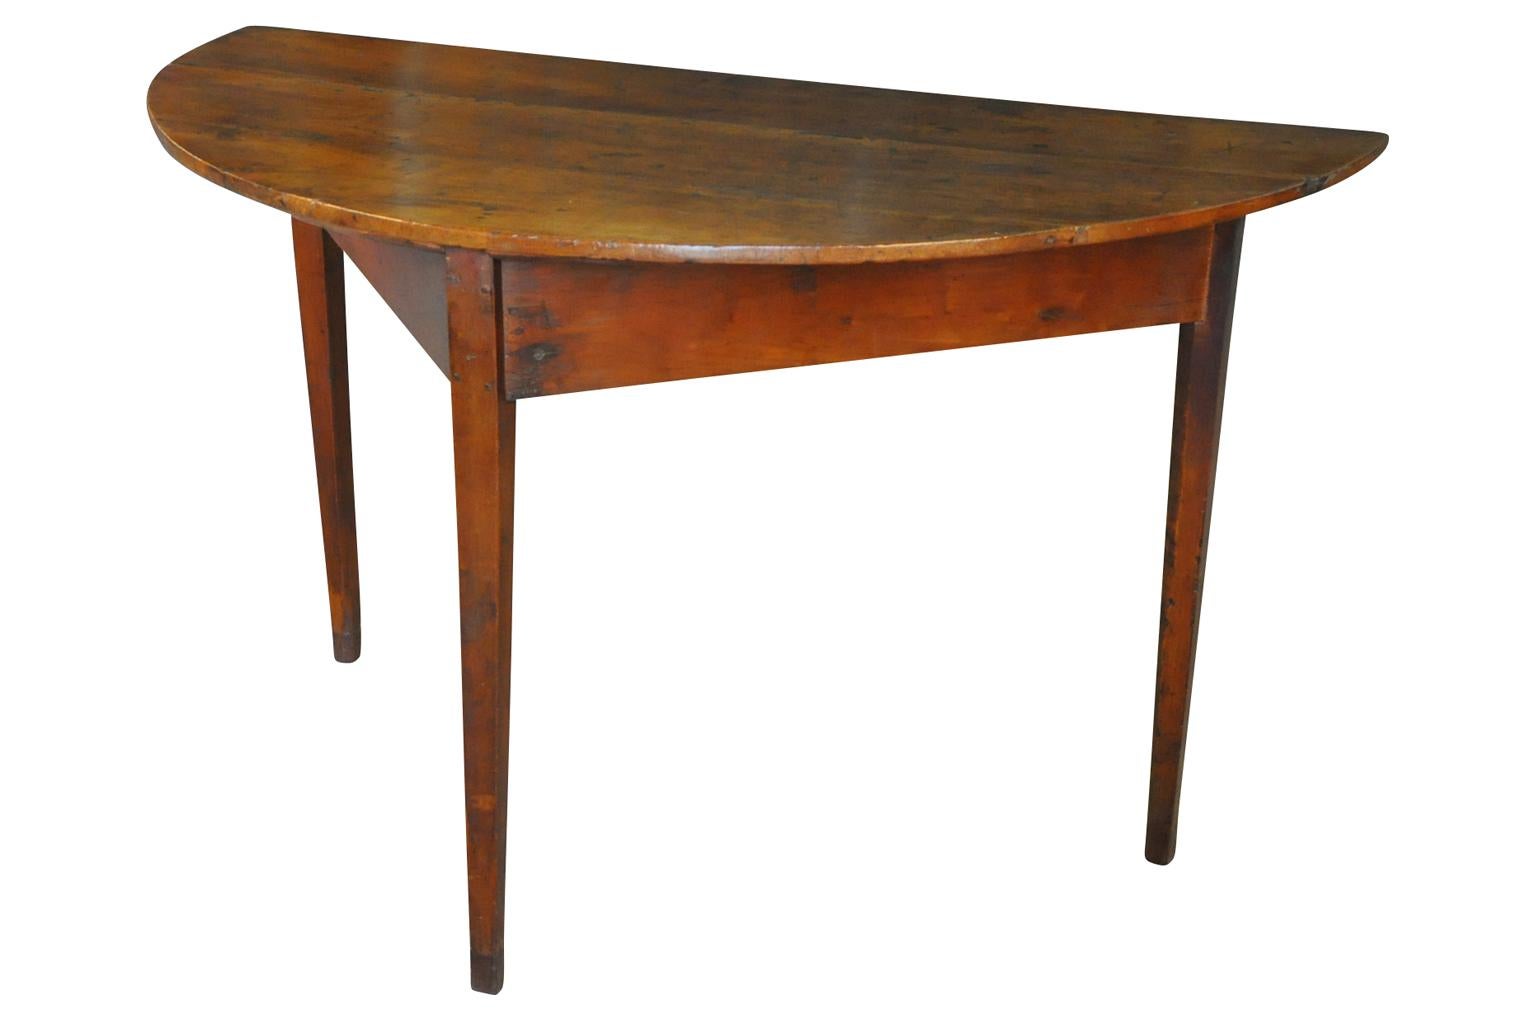 A very handsome early 19th century demilune table from Spain. Beautifully constructed with very Minimalist lines from walnut. Super patina.